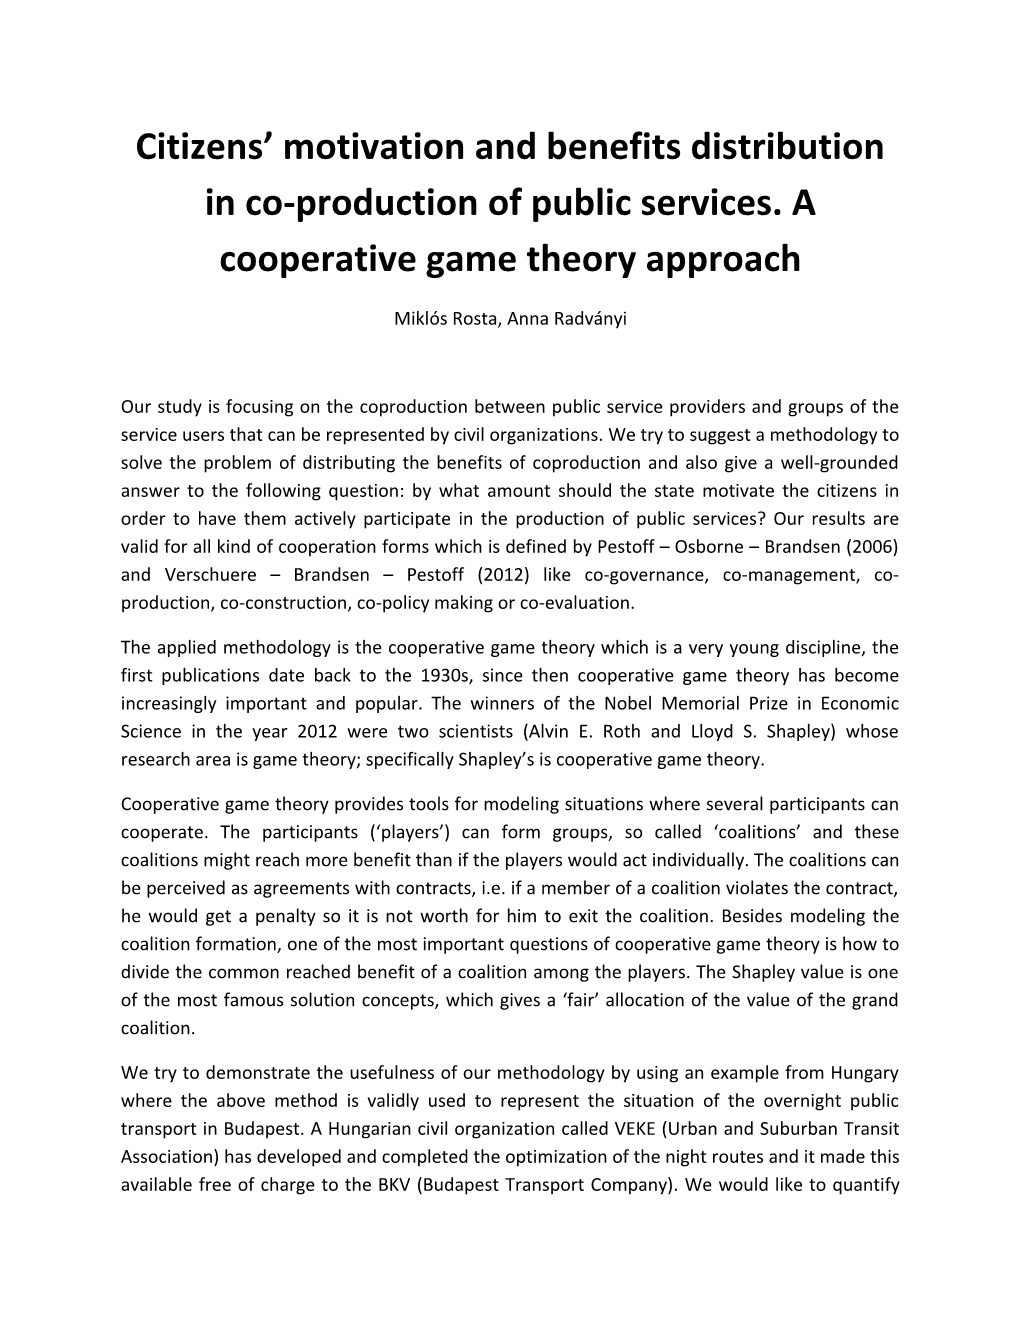 Citizens Motivation and Benefits Distribution in Co-Production of Public Services